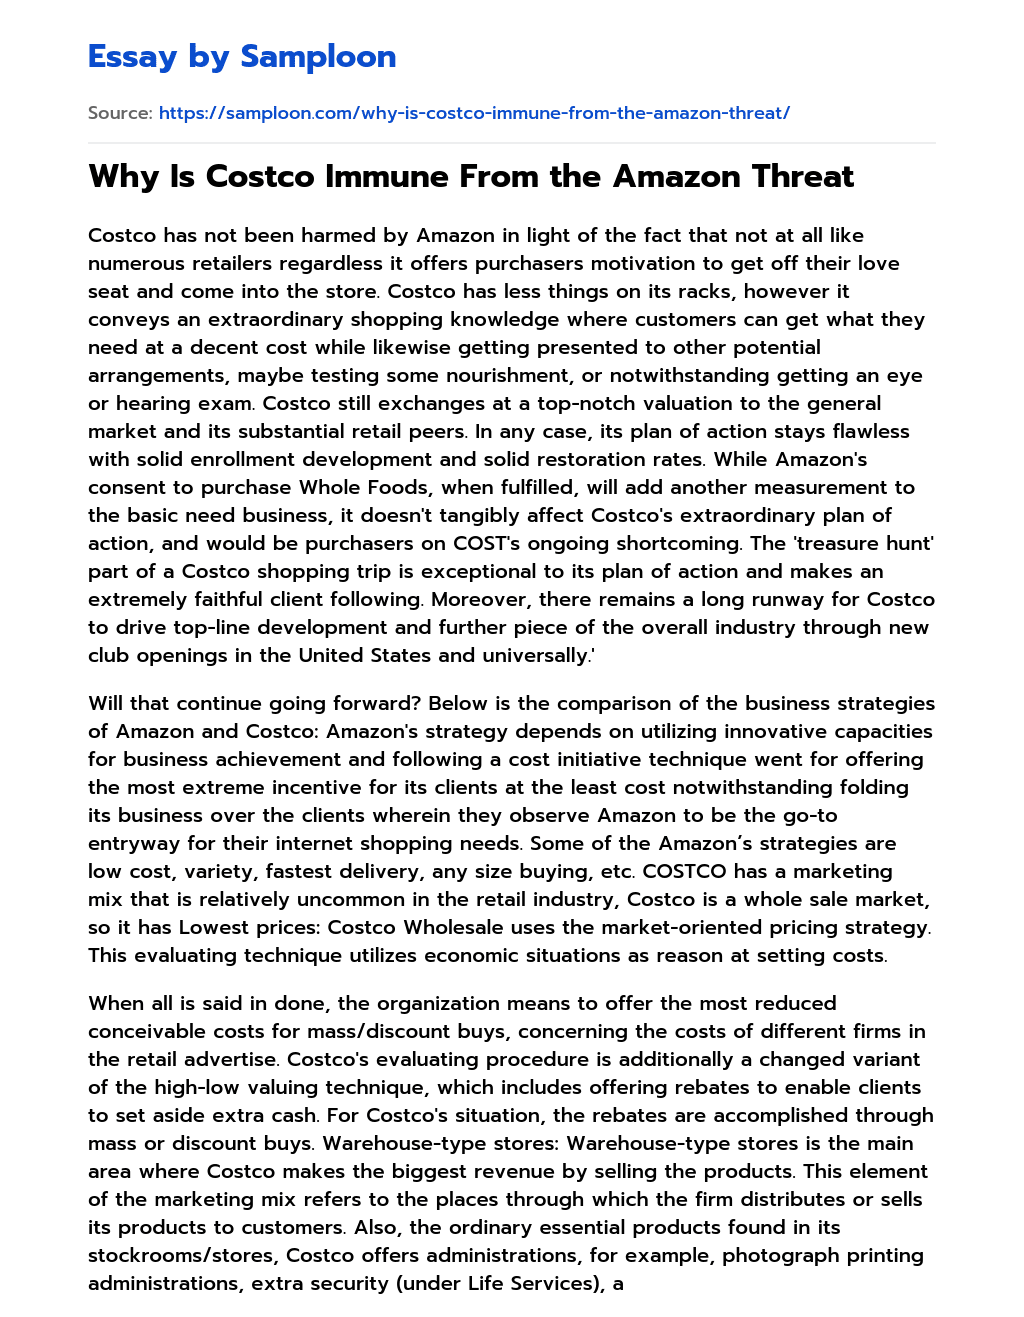 Why Is Costco Immune From the Amazon Threat essay